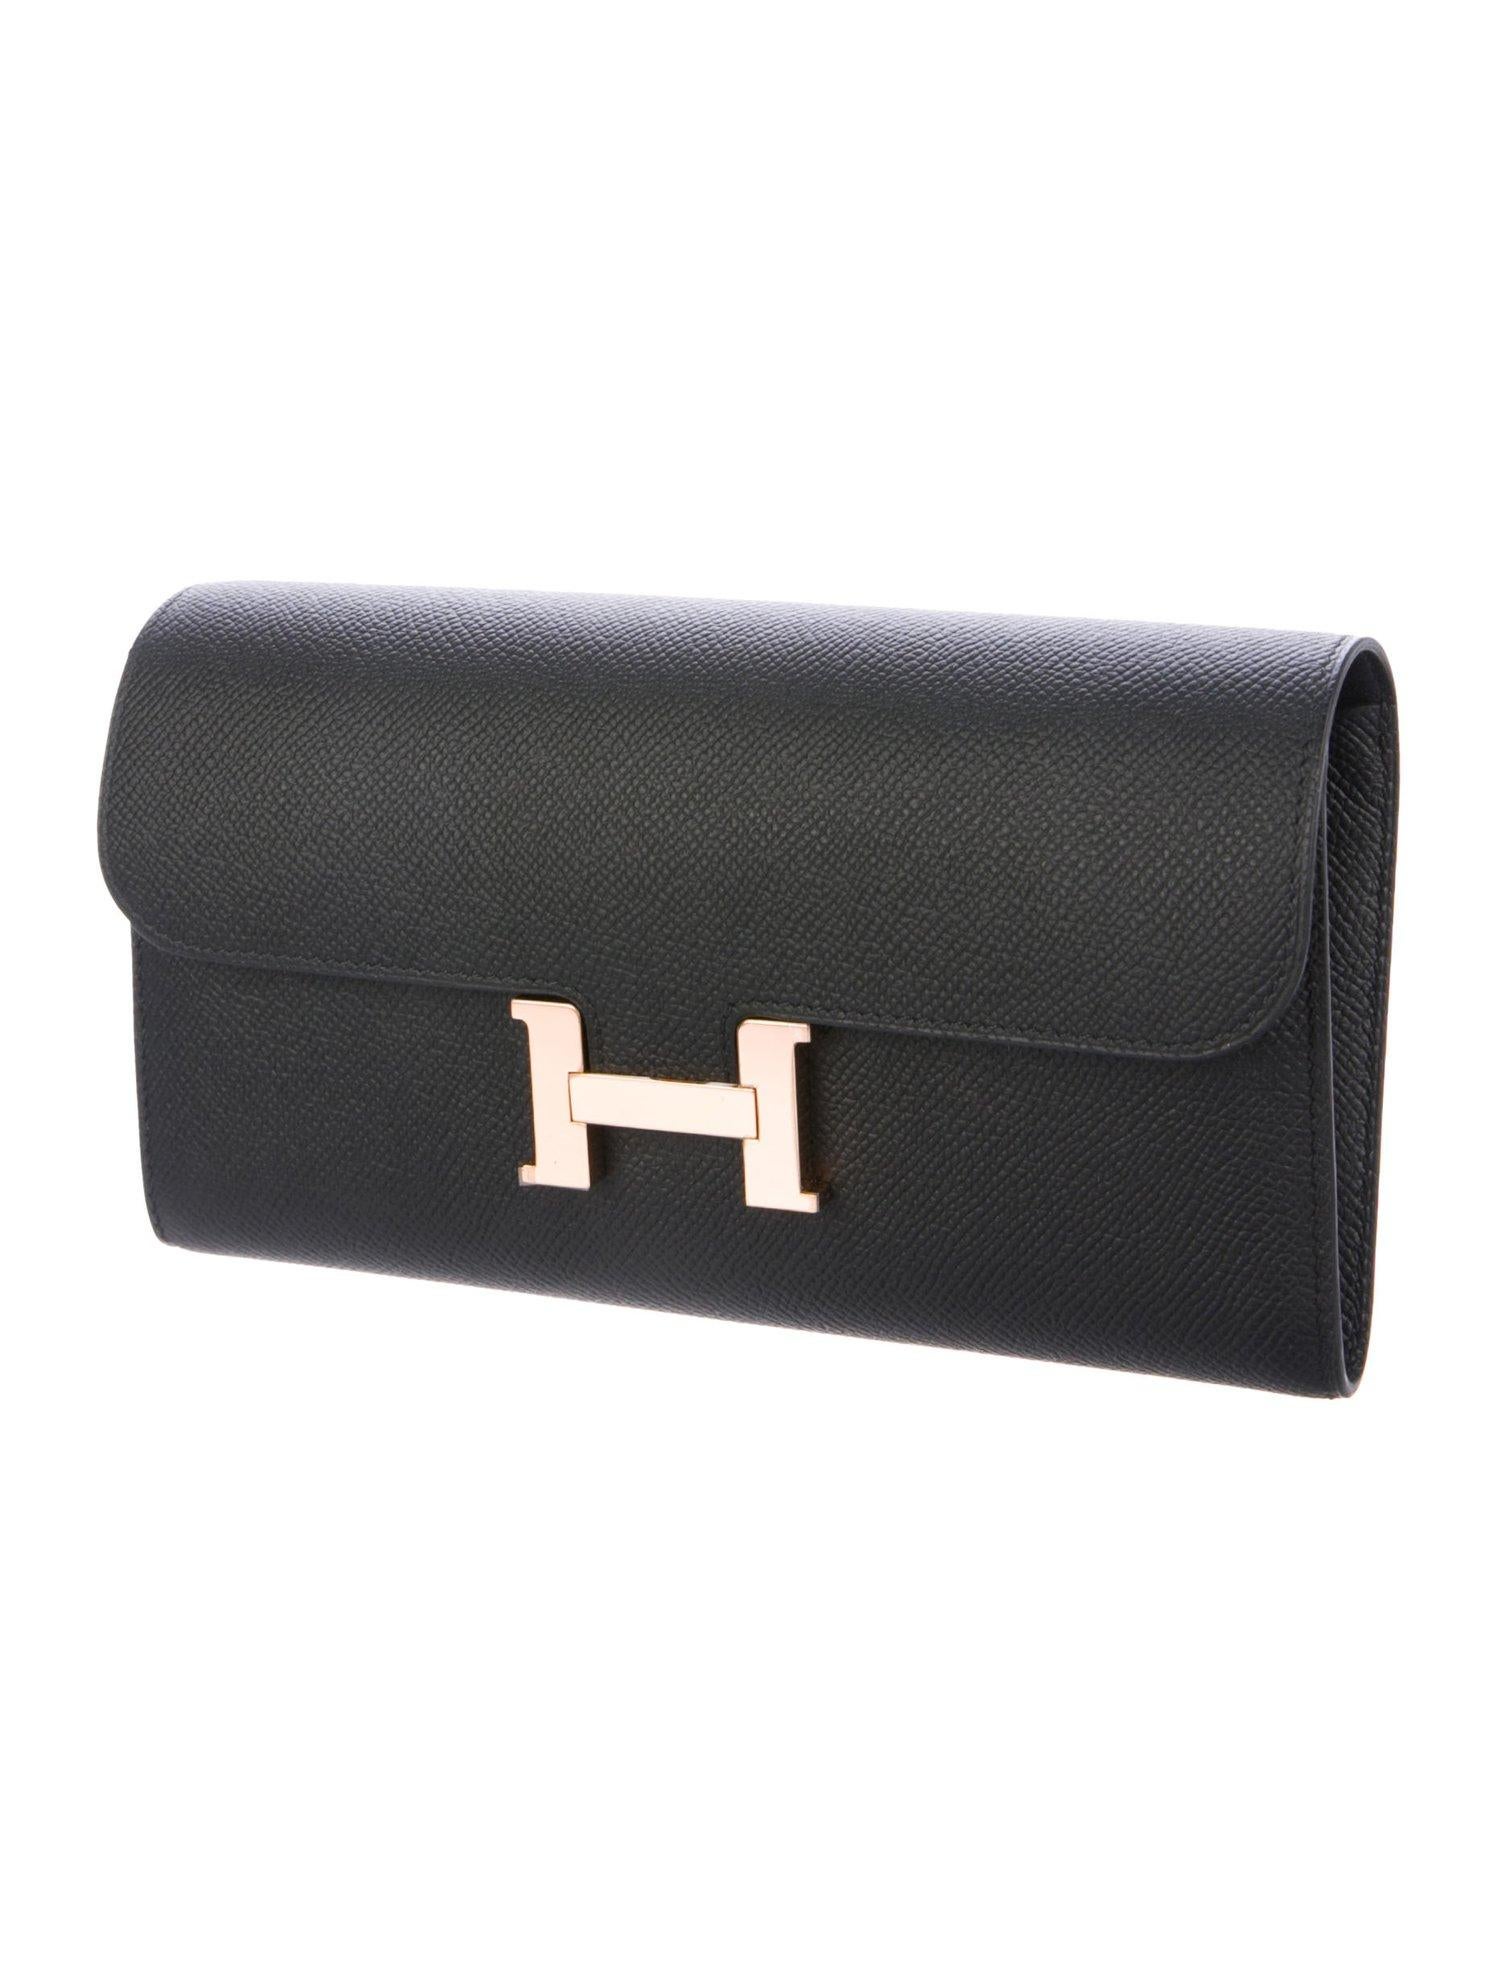 Women's Hermes Black Leather Rose Gold 'H' Charm Logo Flap Clutch Wallet in Box